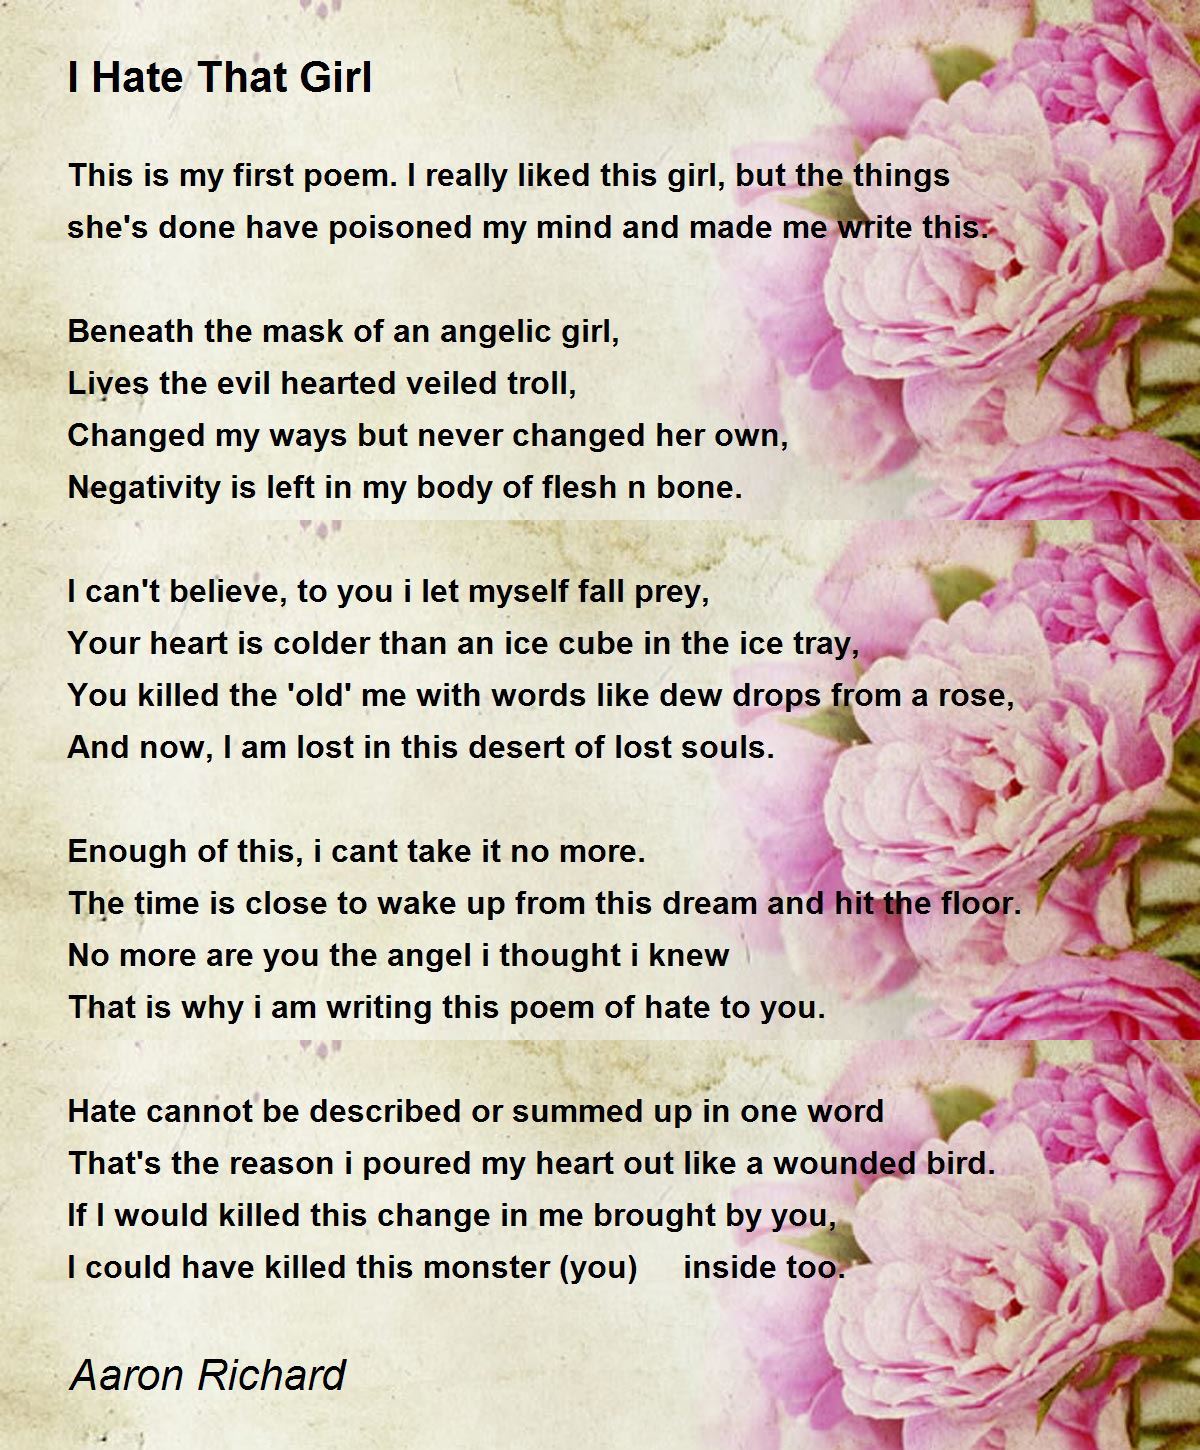 I Hate That Girl - I Hate That Girl Poem by Aaron Richard